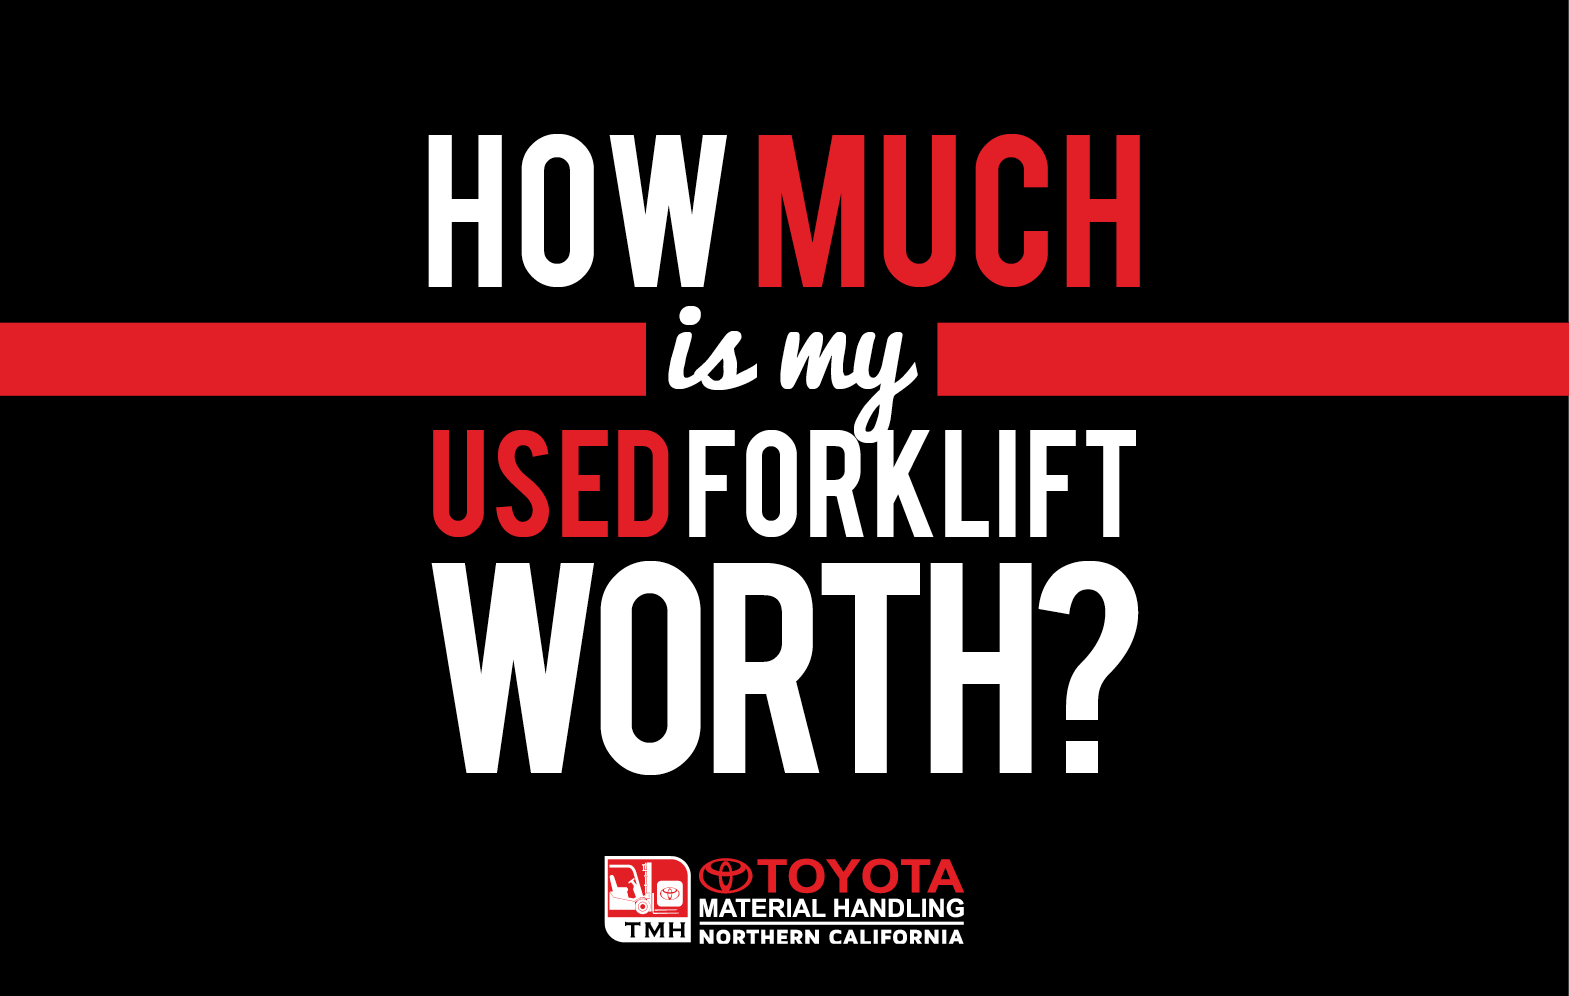 How Much Is My Used Forklift Worth?